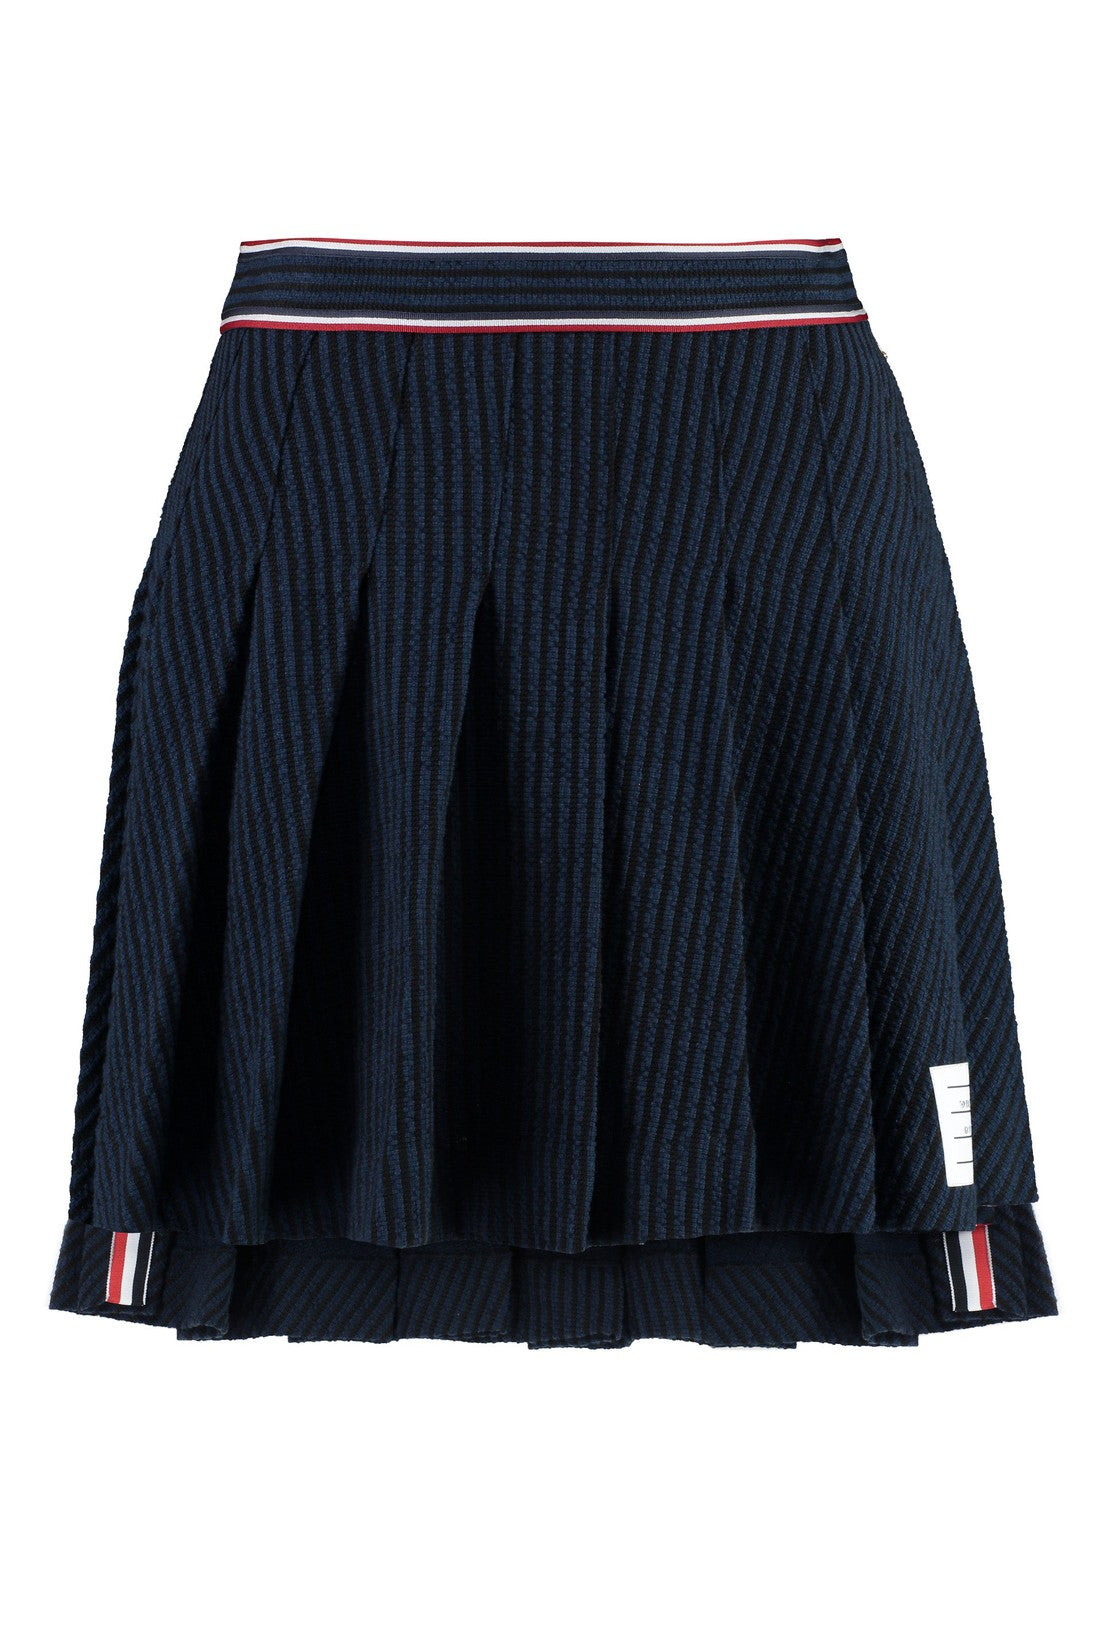 Thom Browne-OUTLET-SALE-Pleated skirt-ARCHIVIST